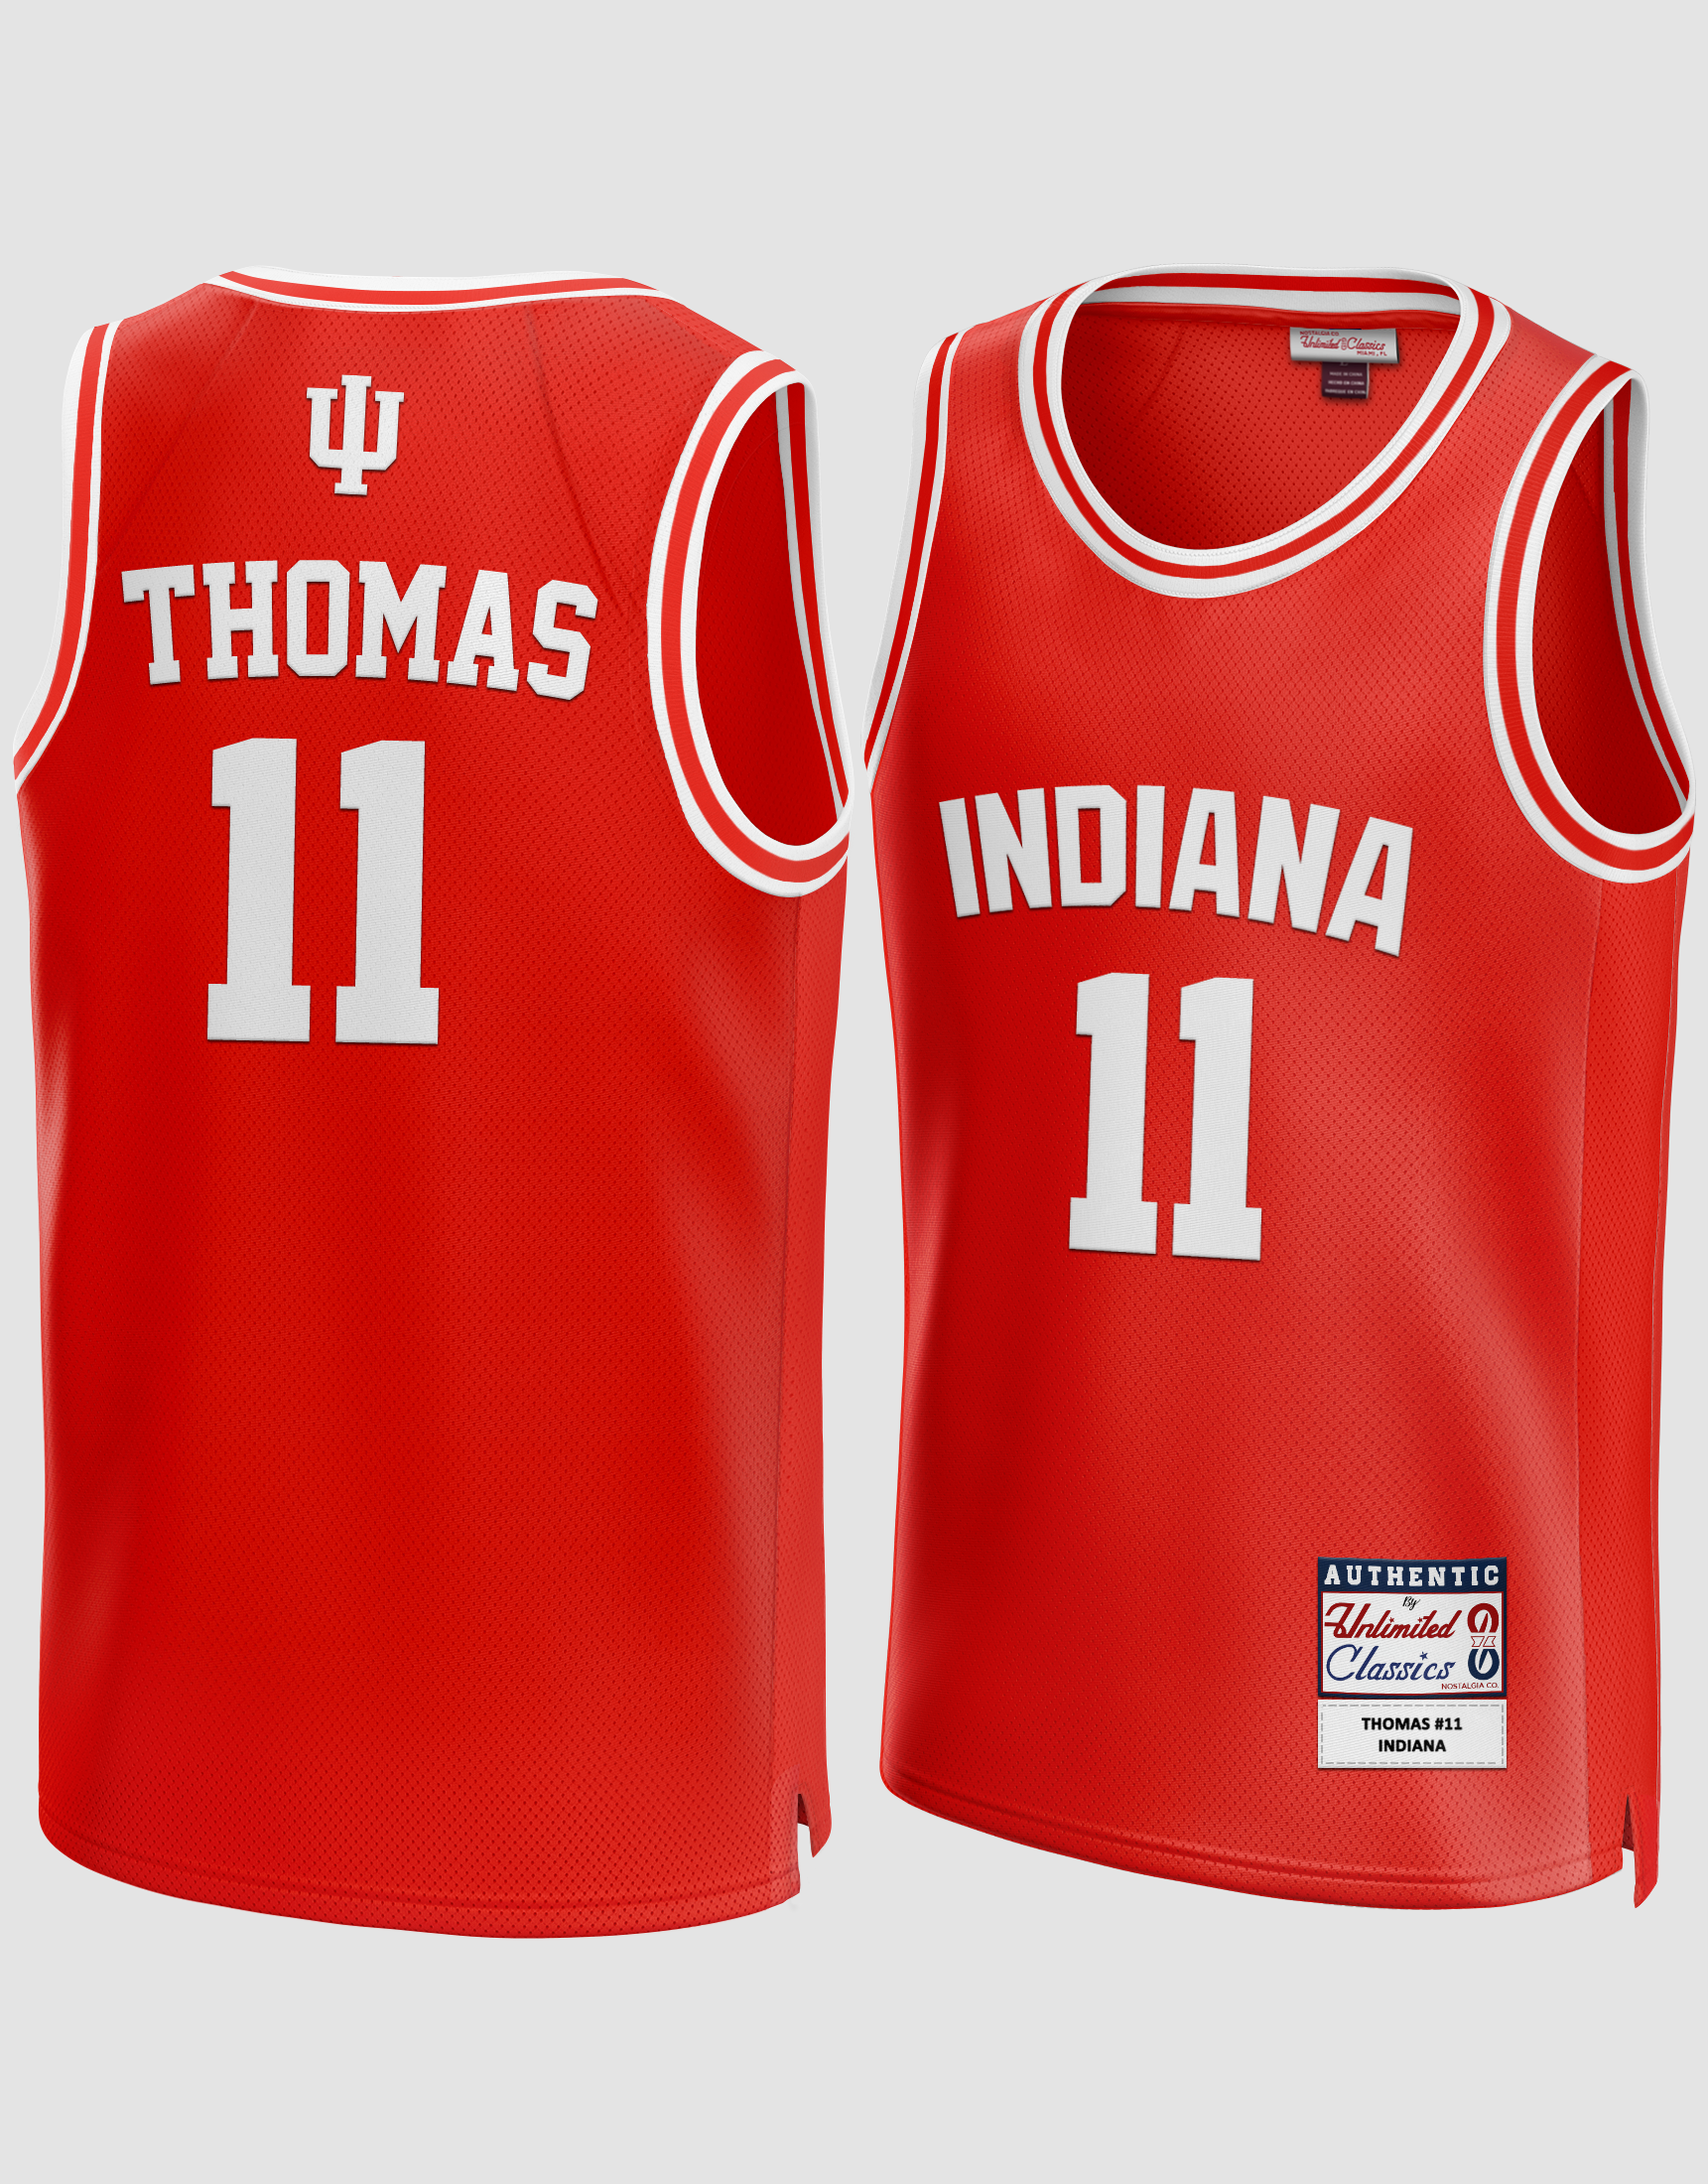 Unlimited Classics Isiah Thomas #11 Indiana Hoosiers Basketball Jersey S